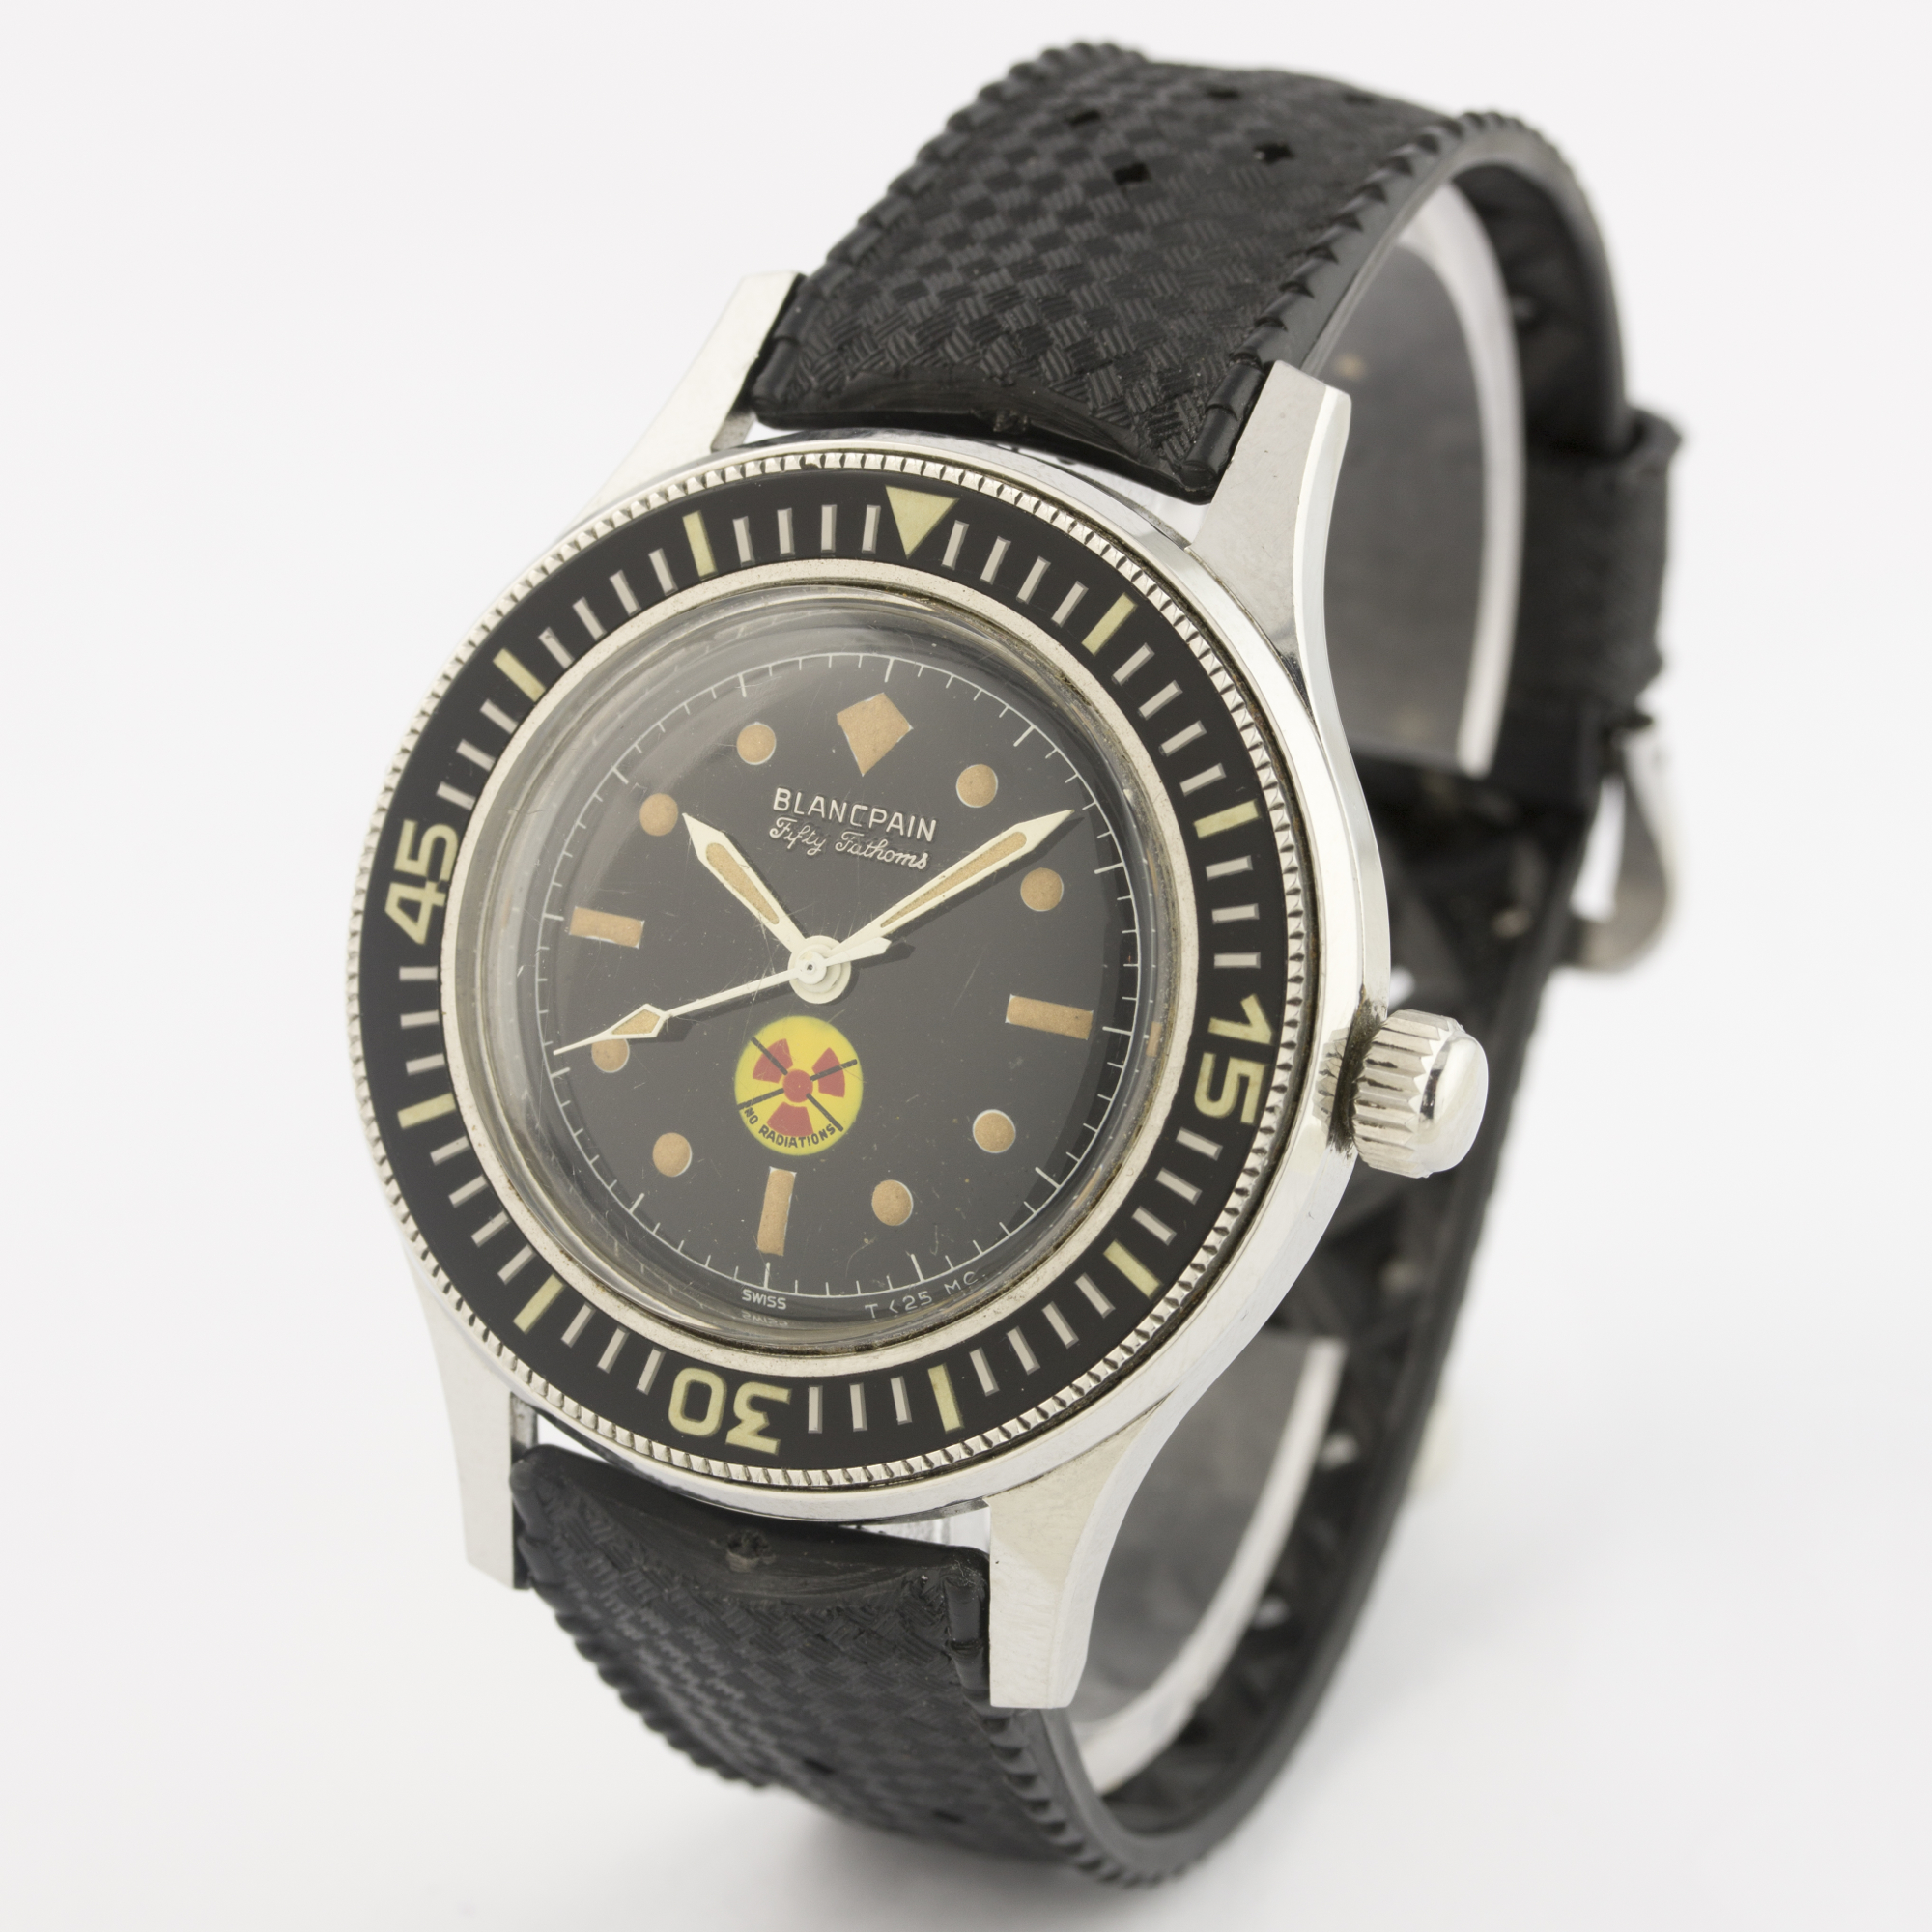 AN EXTREMELY RARE GENTLEMAN'S STAINLESS STEEL BLANCPAIN FIFTY FATHOMS DIVERS WRIST WATCH CIRCA 1960s - Image 4 of 9